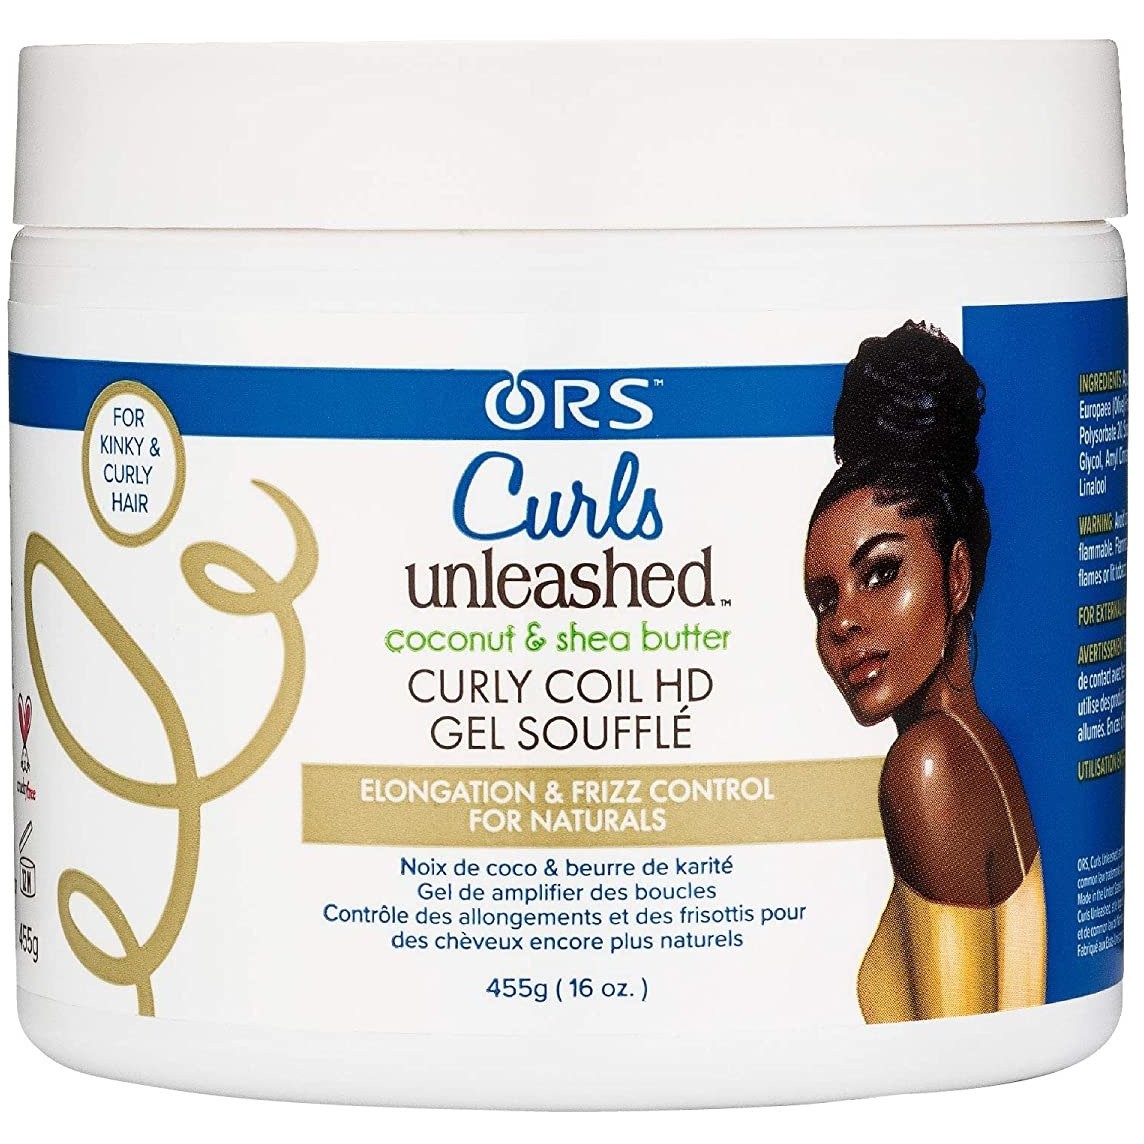 ORS Curls Unleashed Curly Coil HD Gel Souffle 16oz.